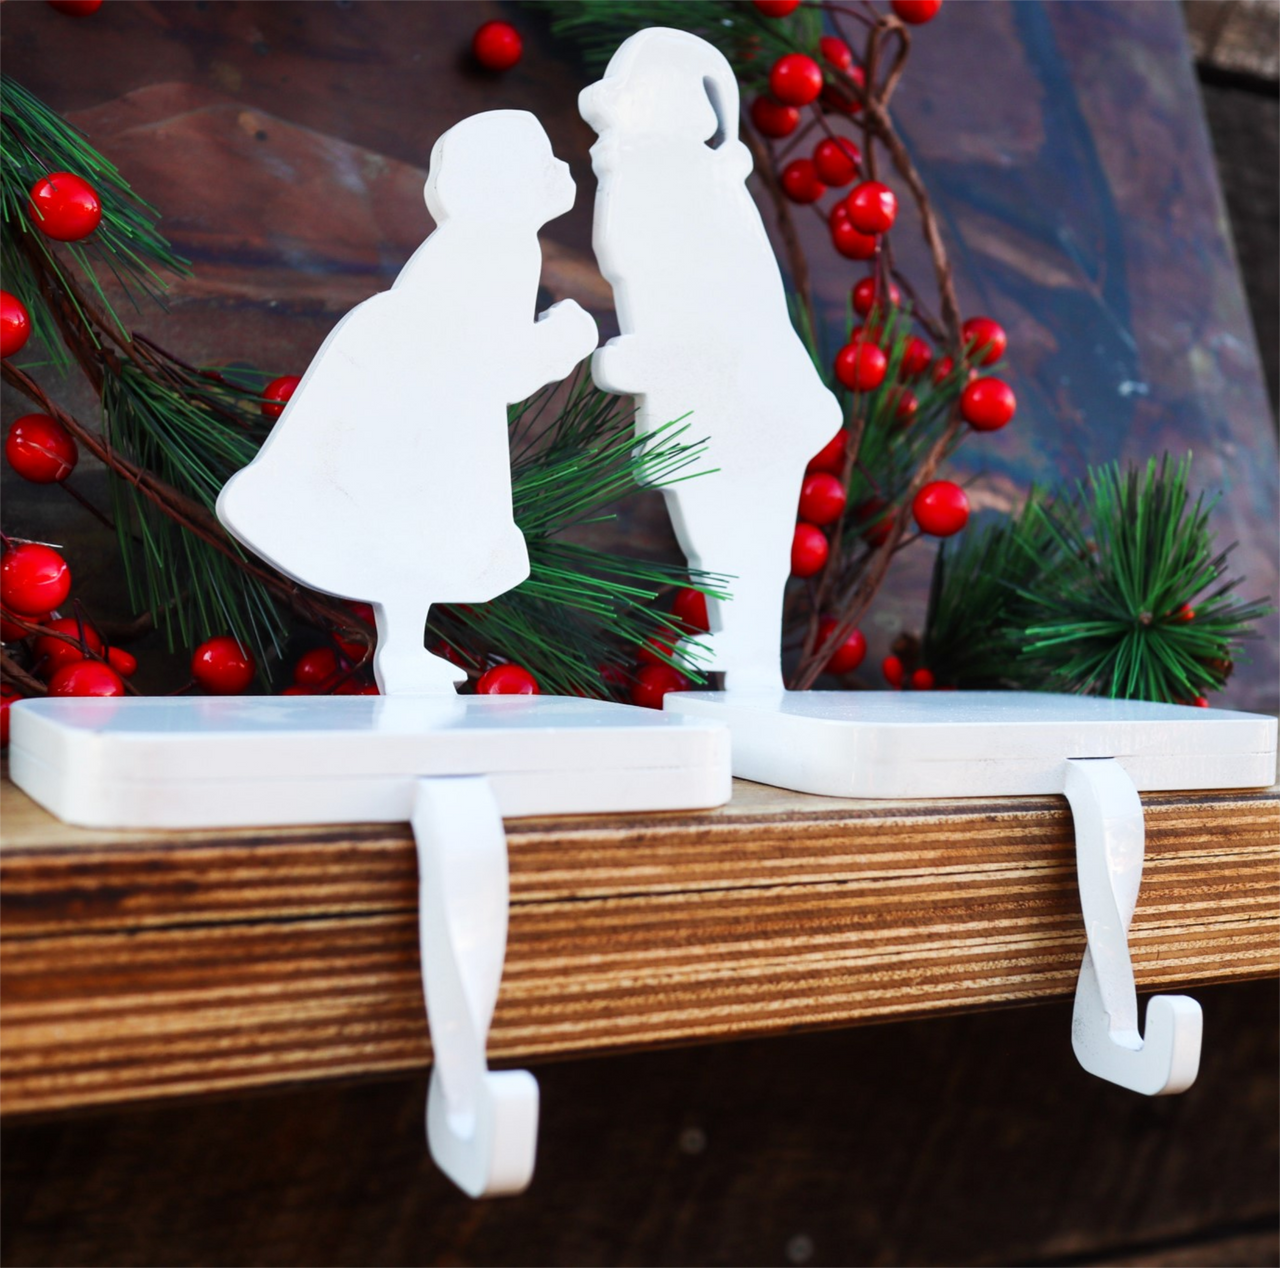 2-PACK Heavy Mr. and Mrs. Claus Stocking Holder - FREE SHIPPING, Heavy, Unique, Use on Mantel, Stairs, or Shelf, Holiday Gift for All